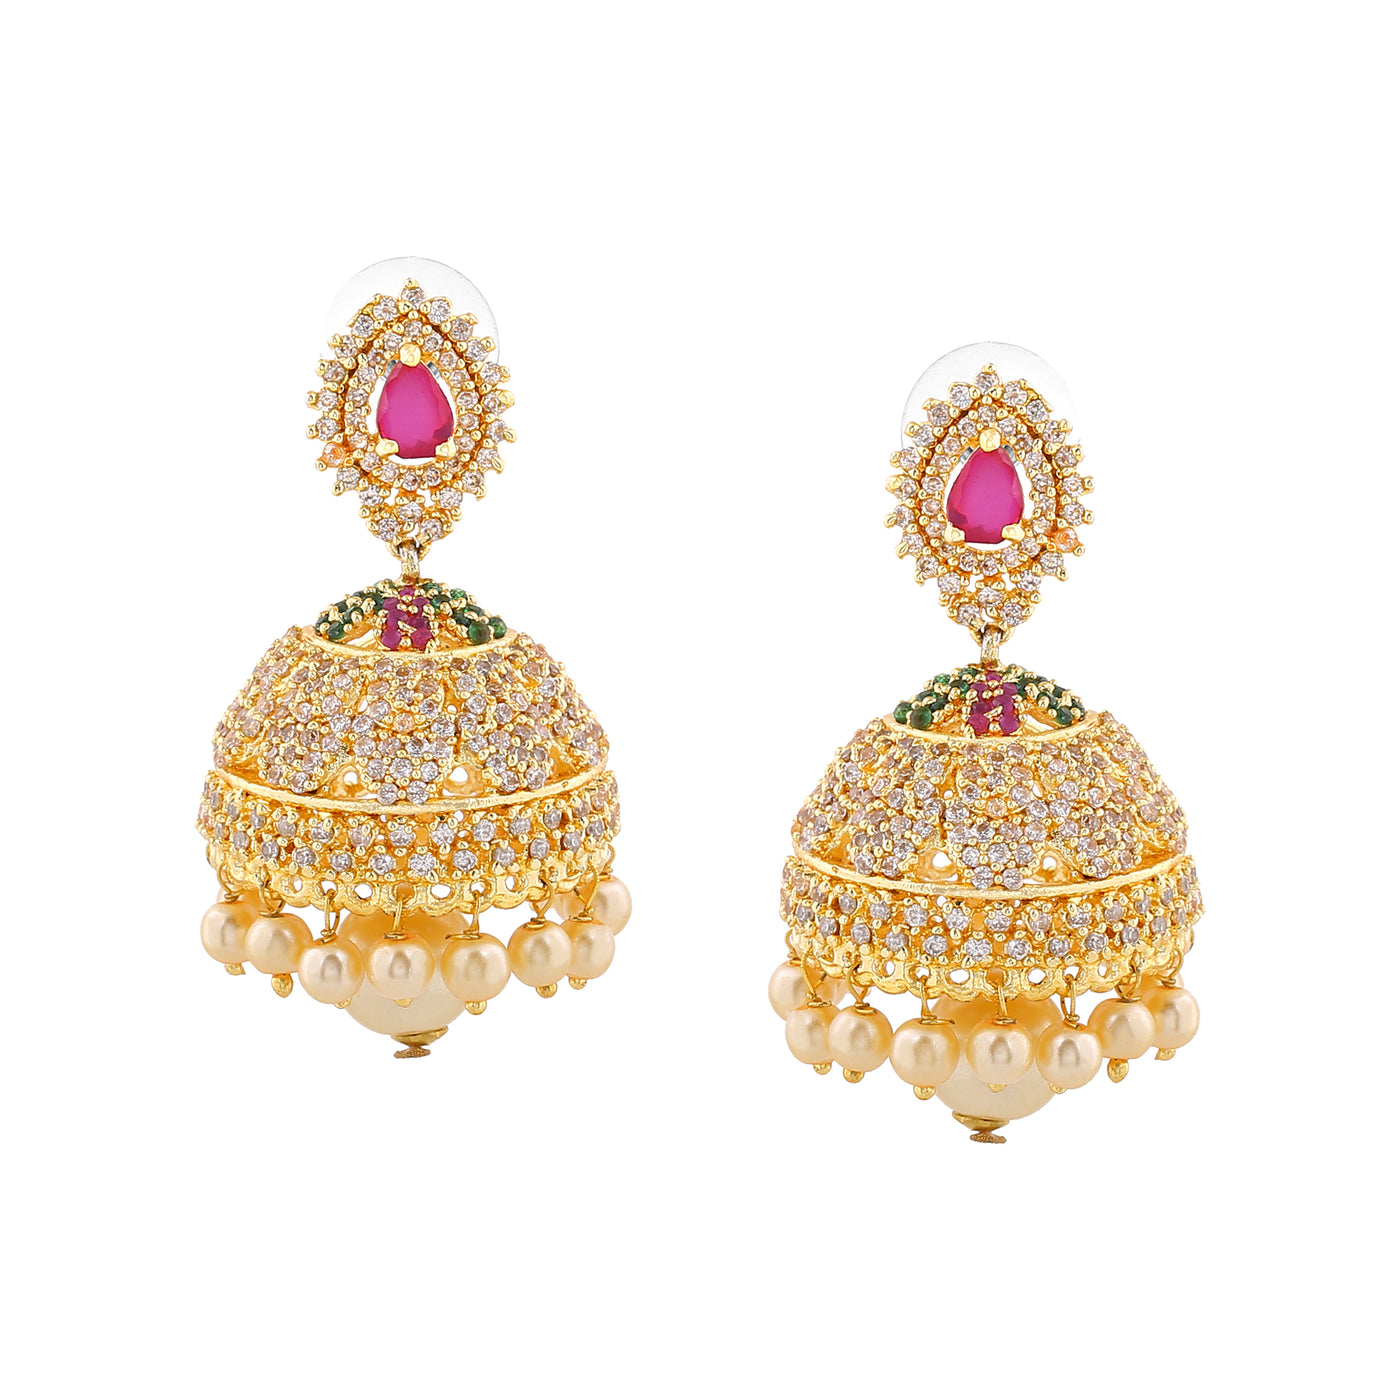 Estele Gold Plated CZ Enchanting Designer Jhumka Earrings with Pearls for Women